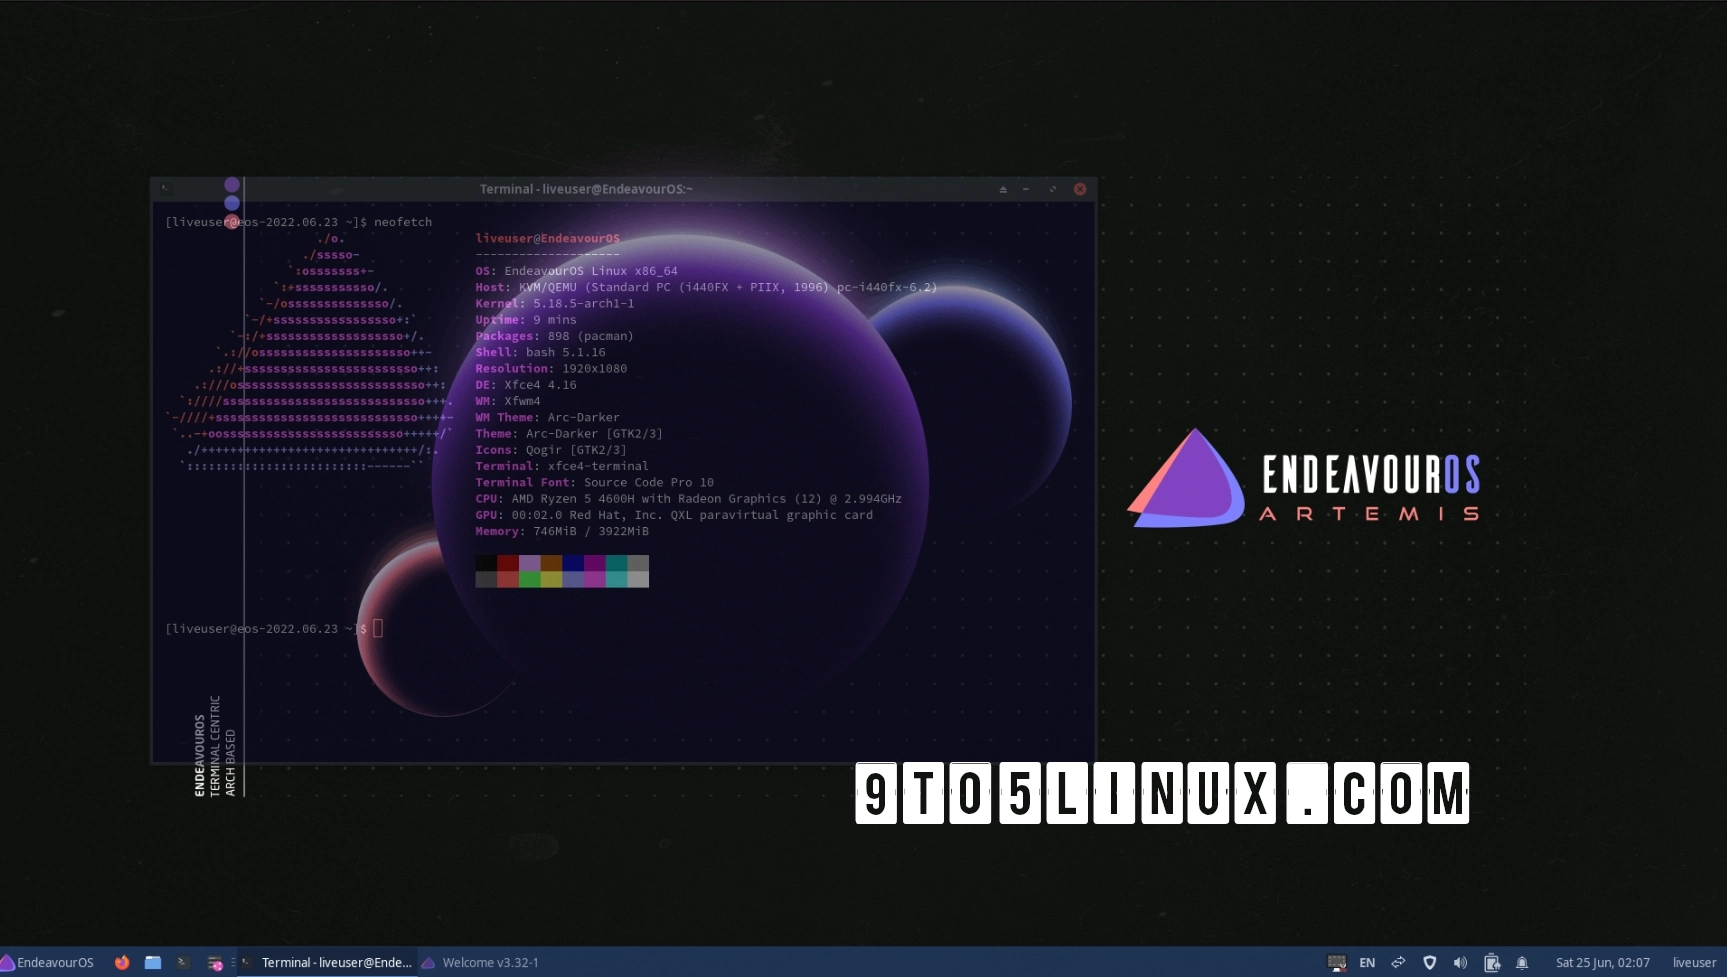 EndeavourOS Artemis Launches with ARM Installer, Linux 5.18, and Latest Calamares